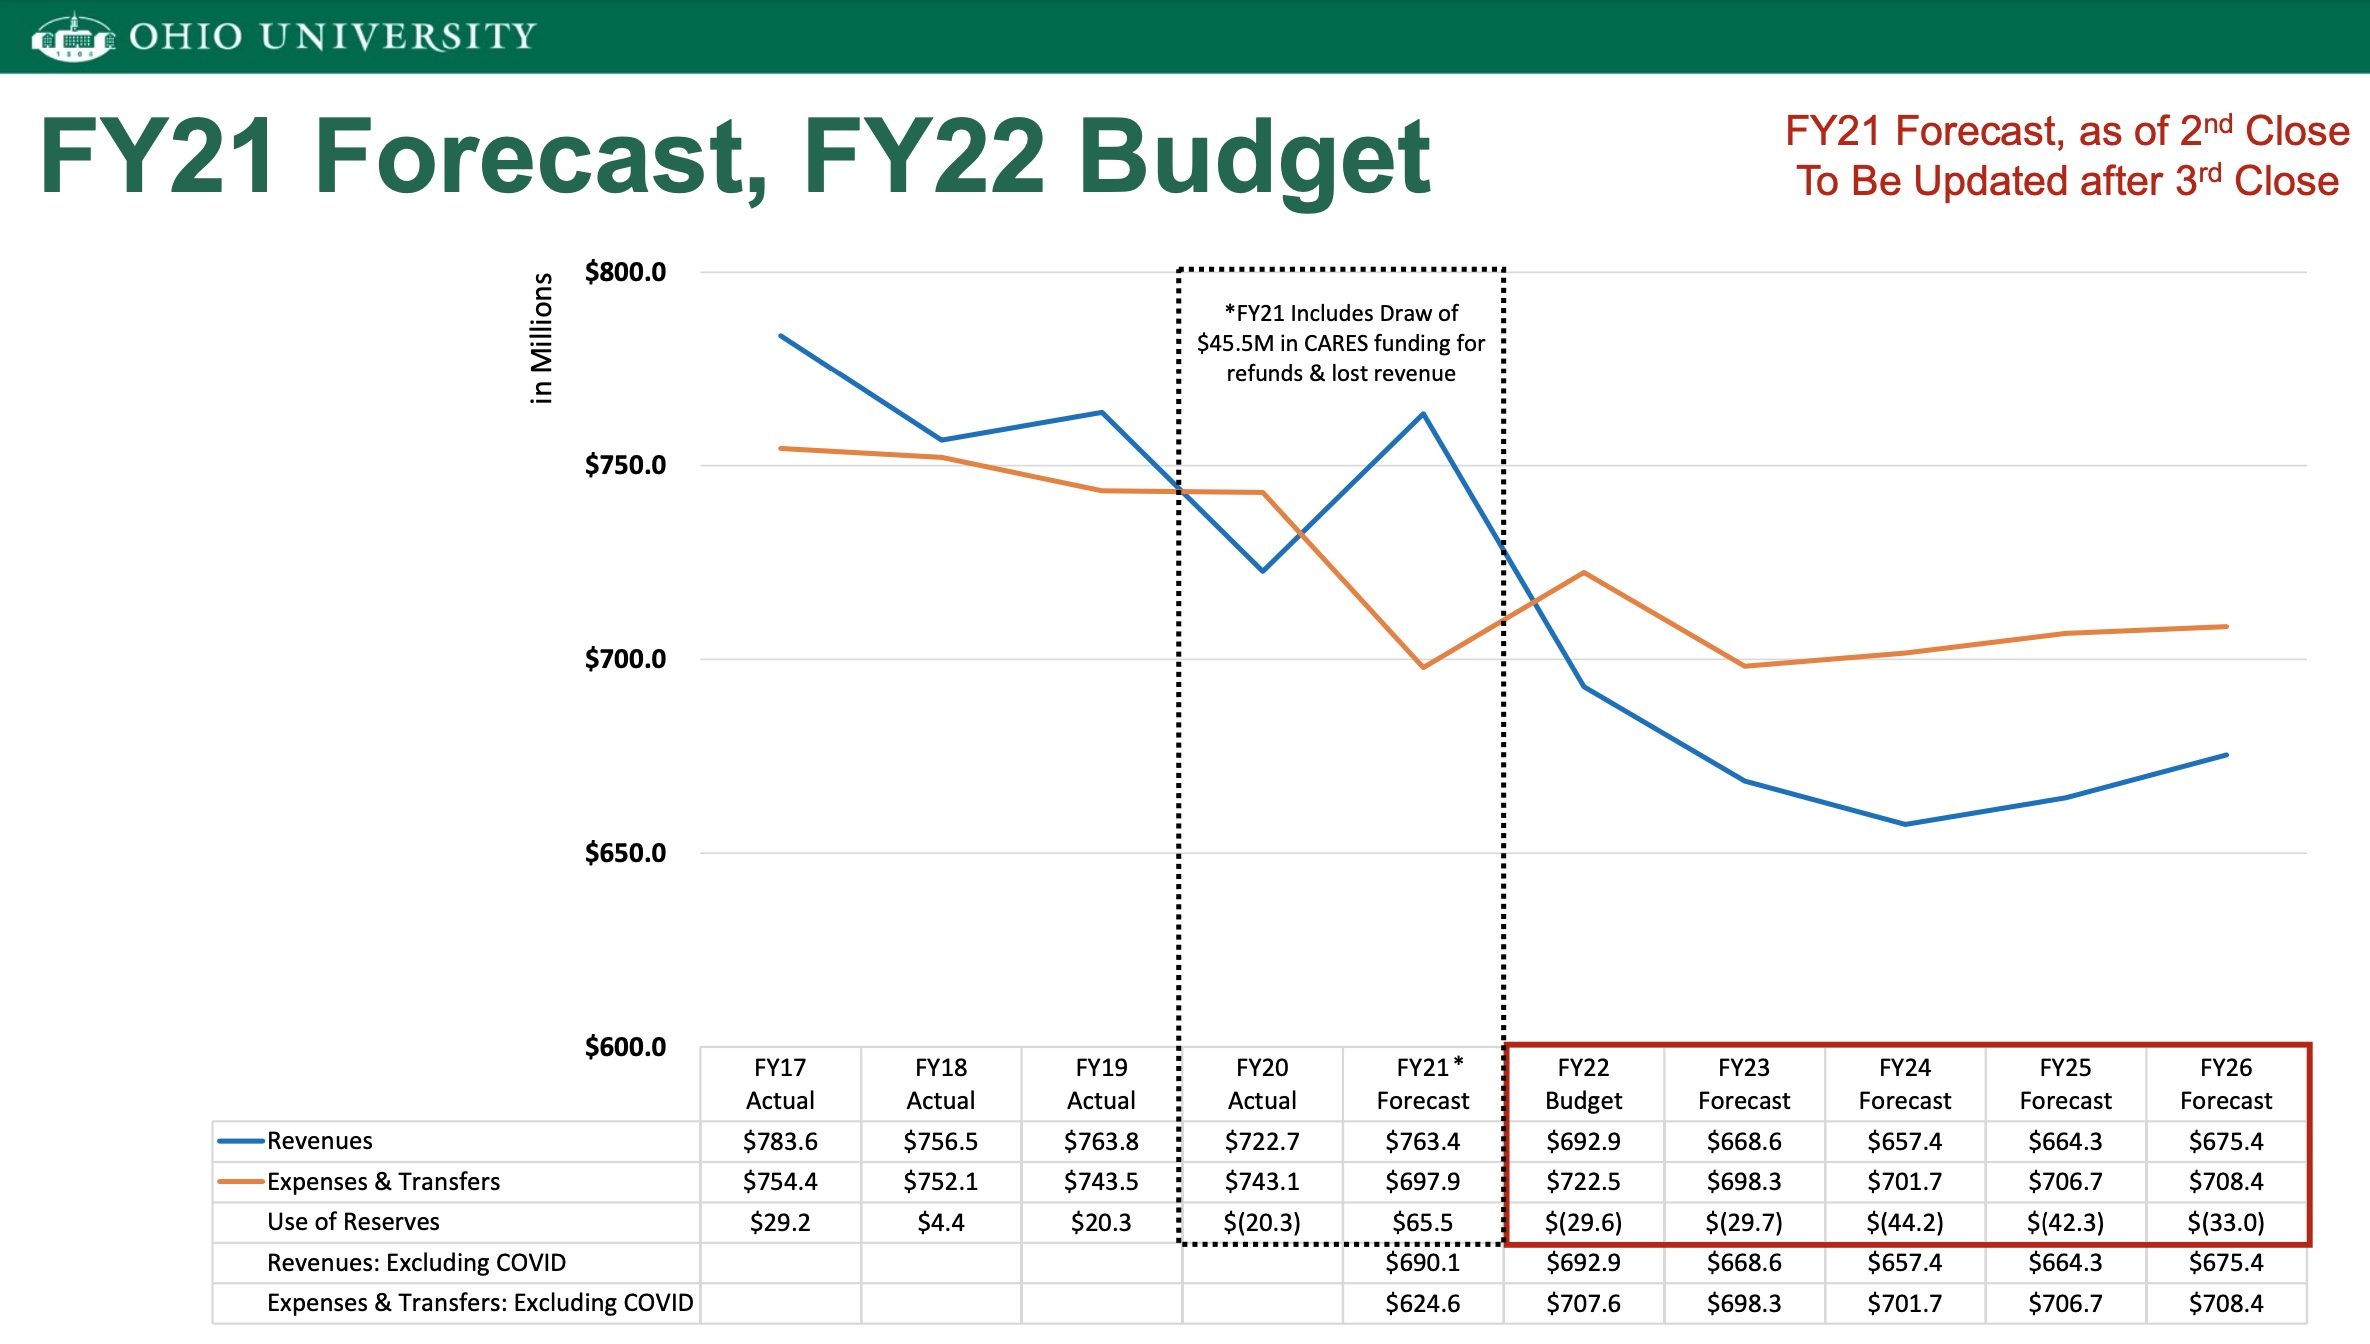 This slide shows Ohio University's projected revenue and expenses through fiscal year 2026.